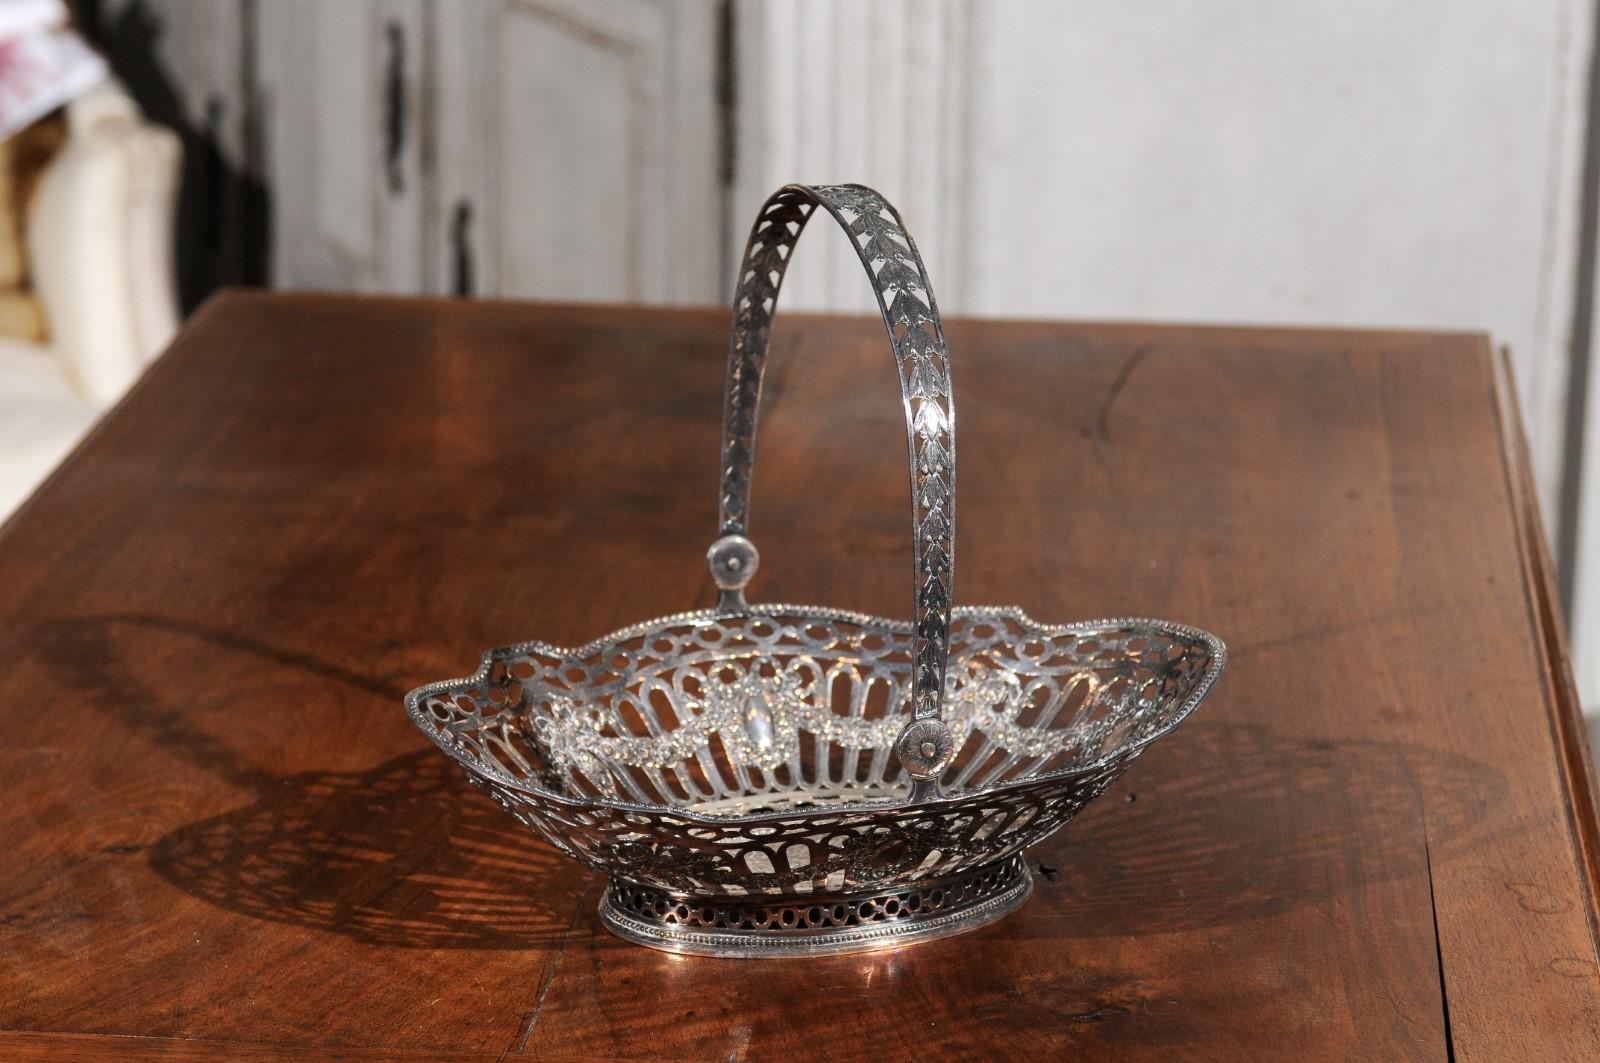 An English silver plated bread basket from the 19th century, with intricate details and putti. Born in England during the 19th century, this exquisite silver plated bread basket features an oval pierced body, adorned with beads, garlands and putti